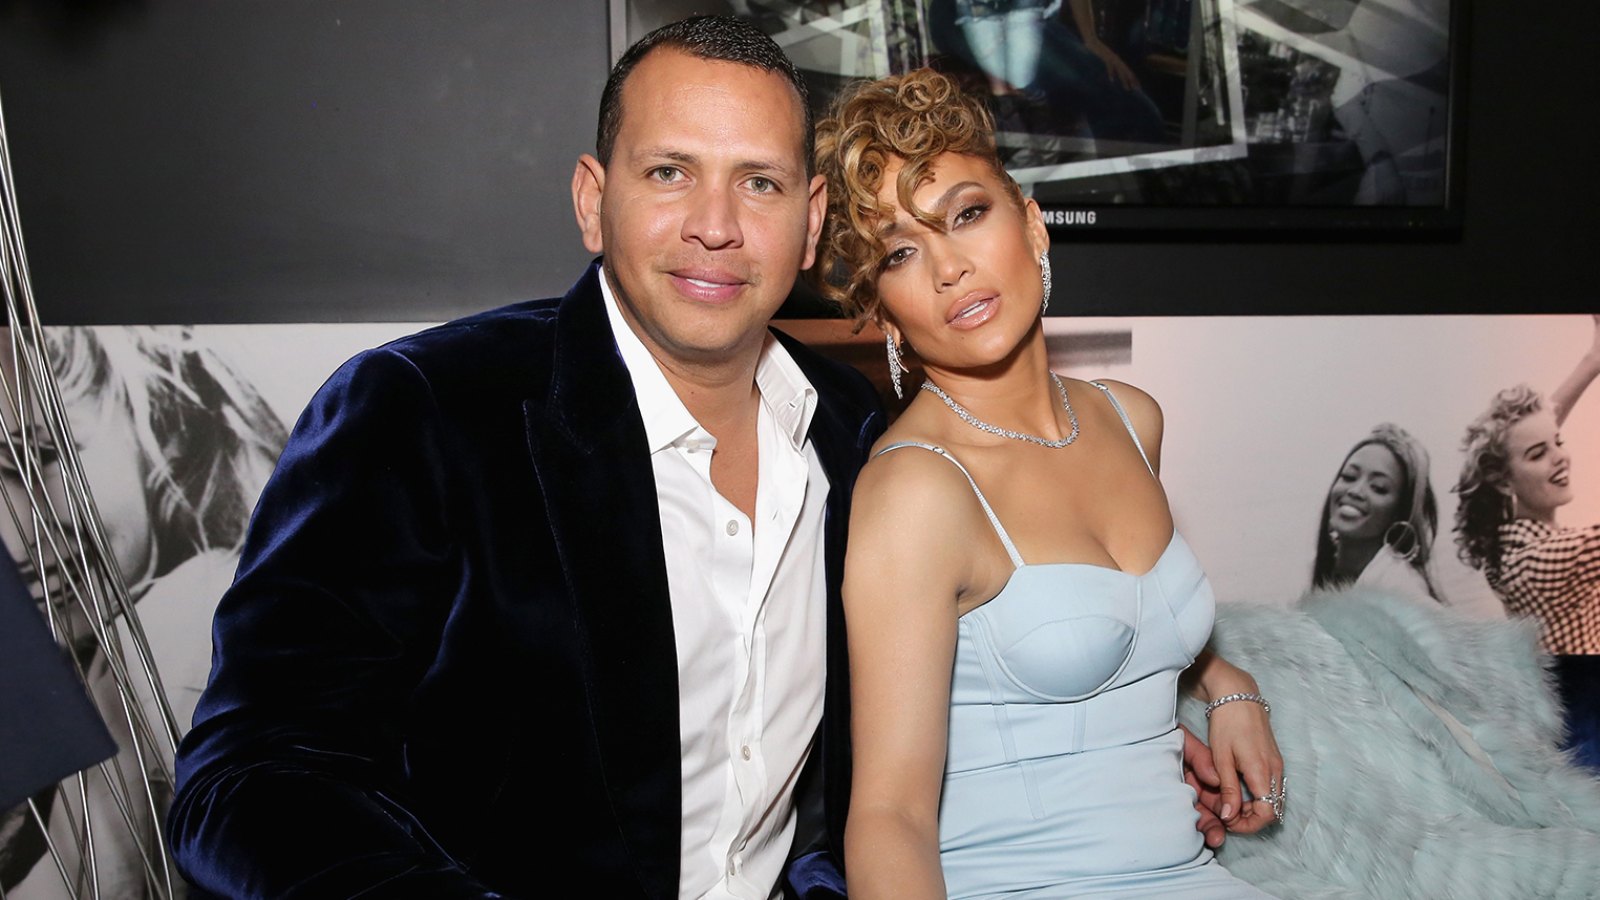 Jennifer Lopez Gushes About Boyfriend Alex Rodriguez: ’We Just Support Each Other’